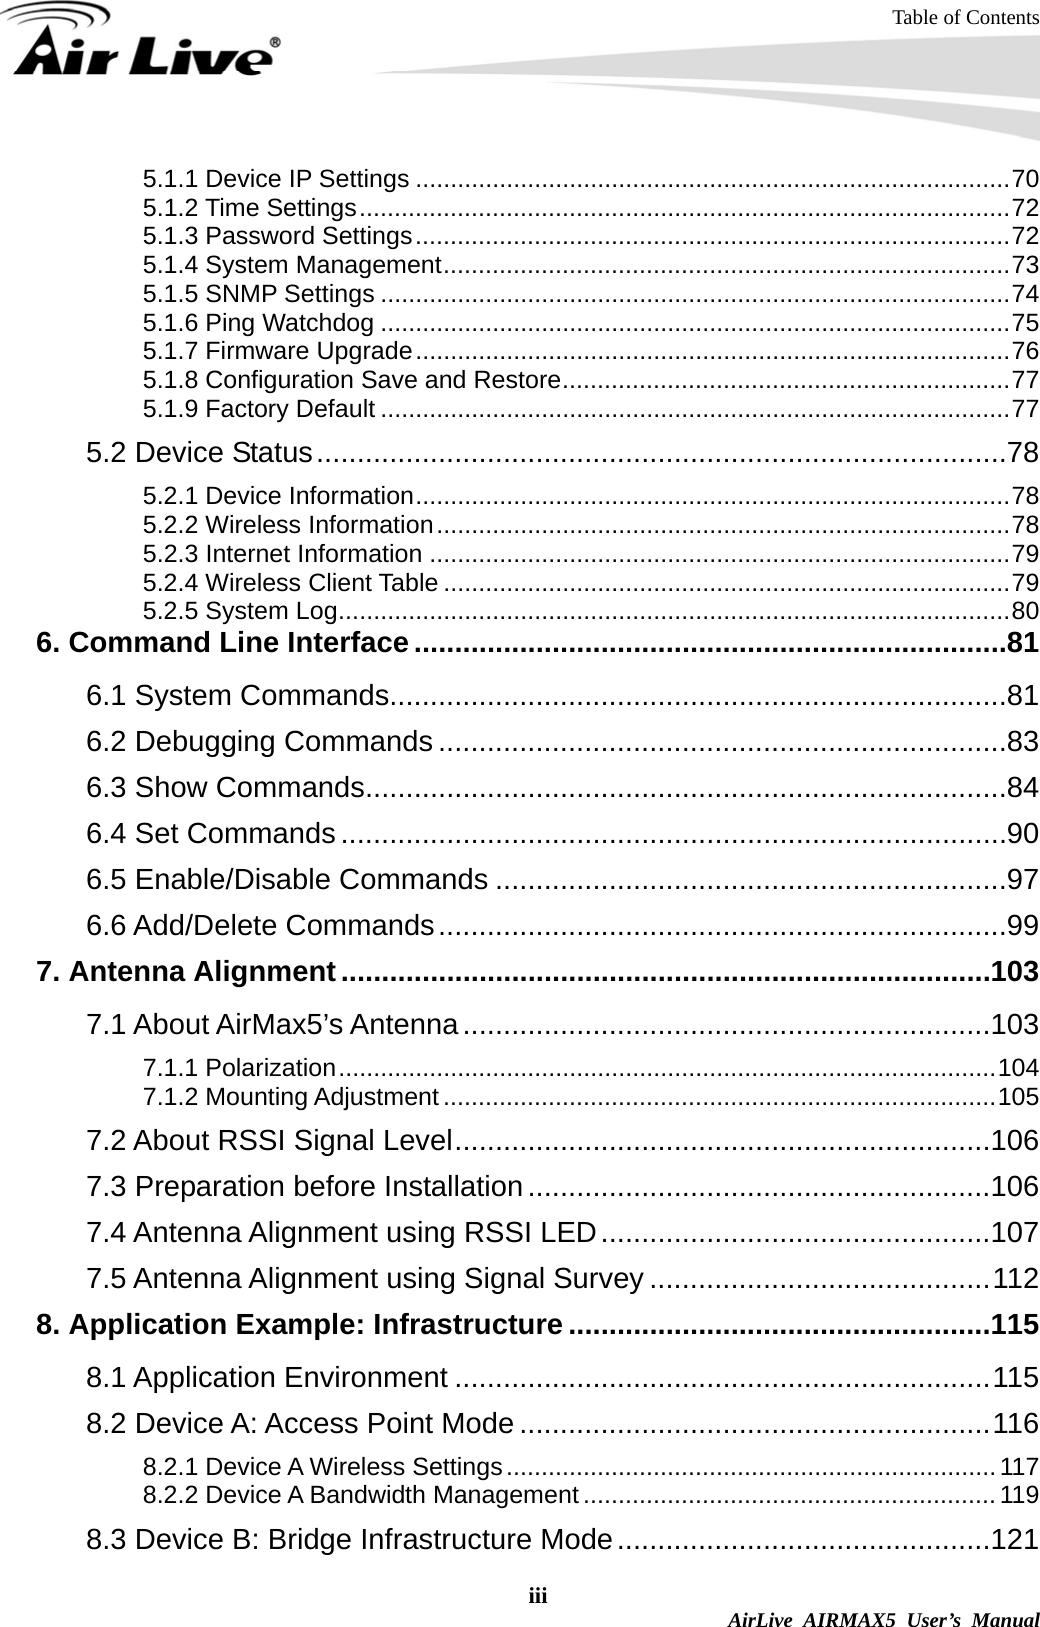 Table of Contents iii  AirLive AIRMAX5 User’s Manual 5.1.1 Device IP Settings .....................................................................................70 5.1.2 Time Settings.............................................................................................72 5.1.3 Password Settings.....................................................................................72 5.1.4 System Management.................................................................................73 5.1.5 SNMP Settings ..........................................................................................74 5.1.6 Ping Watchdog ..........................................................................................75 5.1.7 Firmware Upgrade.....................................................................................76 5.1.8 Configuration Save and Restore................................................................77 5.1.9 Factory Default ..........................................................................................77 5.2 Device Status.....................................................................................78 5.2.1 Device Information.....................................................................................78 5.2.2 Wireless Information..................................................................................78 5.2.3 Internet Information ...................................................................................79 5.2.4 Wireless Client Table .................................................................................79 5.2.5 System Log................................................................................................80 6. Command Line Interface.........................................................................81 6.1 System Commands............................................................................81 6.2 Debugging Commands ......................................................................83 6.3 Show Commands...............................................................................84 6.4 Set Commands ..................................................................................90 6.5 Enable/Disable Commands ...............................................................97 6.6 Add/Delete Commands......................................................................99 7. Antenna Alignment................................................................................103 7.1 About AirMax5’s Antenna.................................................................103 7.1.1 Polarization..............................................................................................104 7.1.2 Mounting Adjustment ...............................................................................105 7.2 About RSSI Signal Level..................................................................106 7.3 Preparation before Installation .........................................................106 7.4 Antenna Alignment using RSSI LED................................................107 7.5 Antenna Alignment using Signal Survey ..........................................112 8. Application Example: Infrastructure ....................................................115 8.1 Application Environment ..................................................................115 8.2 Device A: Access Point Mode ..........................................................116 8.2.1 Device A Wireless Settings......................................................................117 8.2.2 Device A Bandwidth Management ...........................................................119 8.3 Device B: Bridge Infrastructure Mode..............................................121 